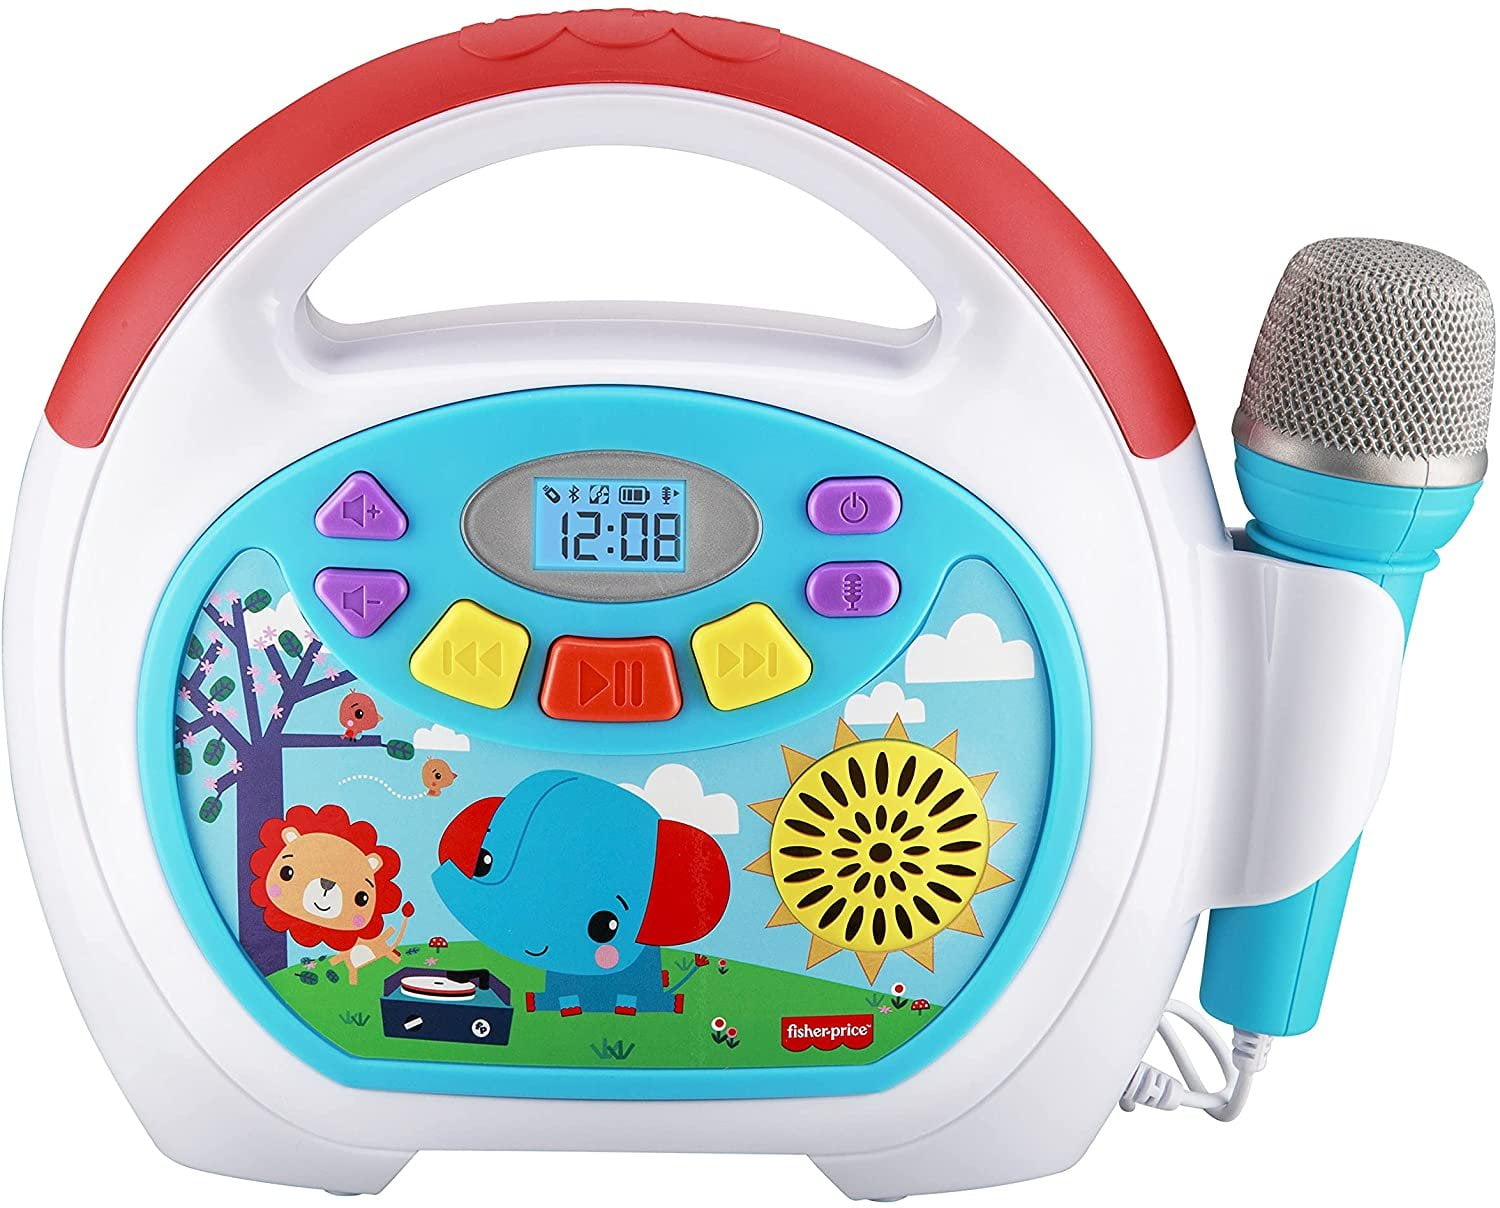 4 DISC MUSIC PLAYER 6 SONGS PER DISC 24 songs W/ Batteries Toddler Toy 